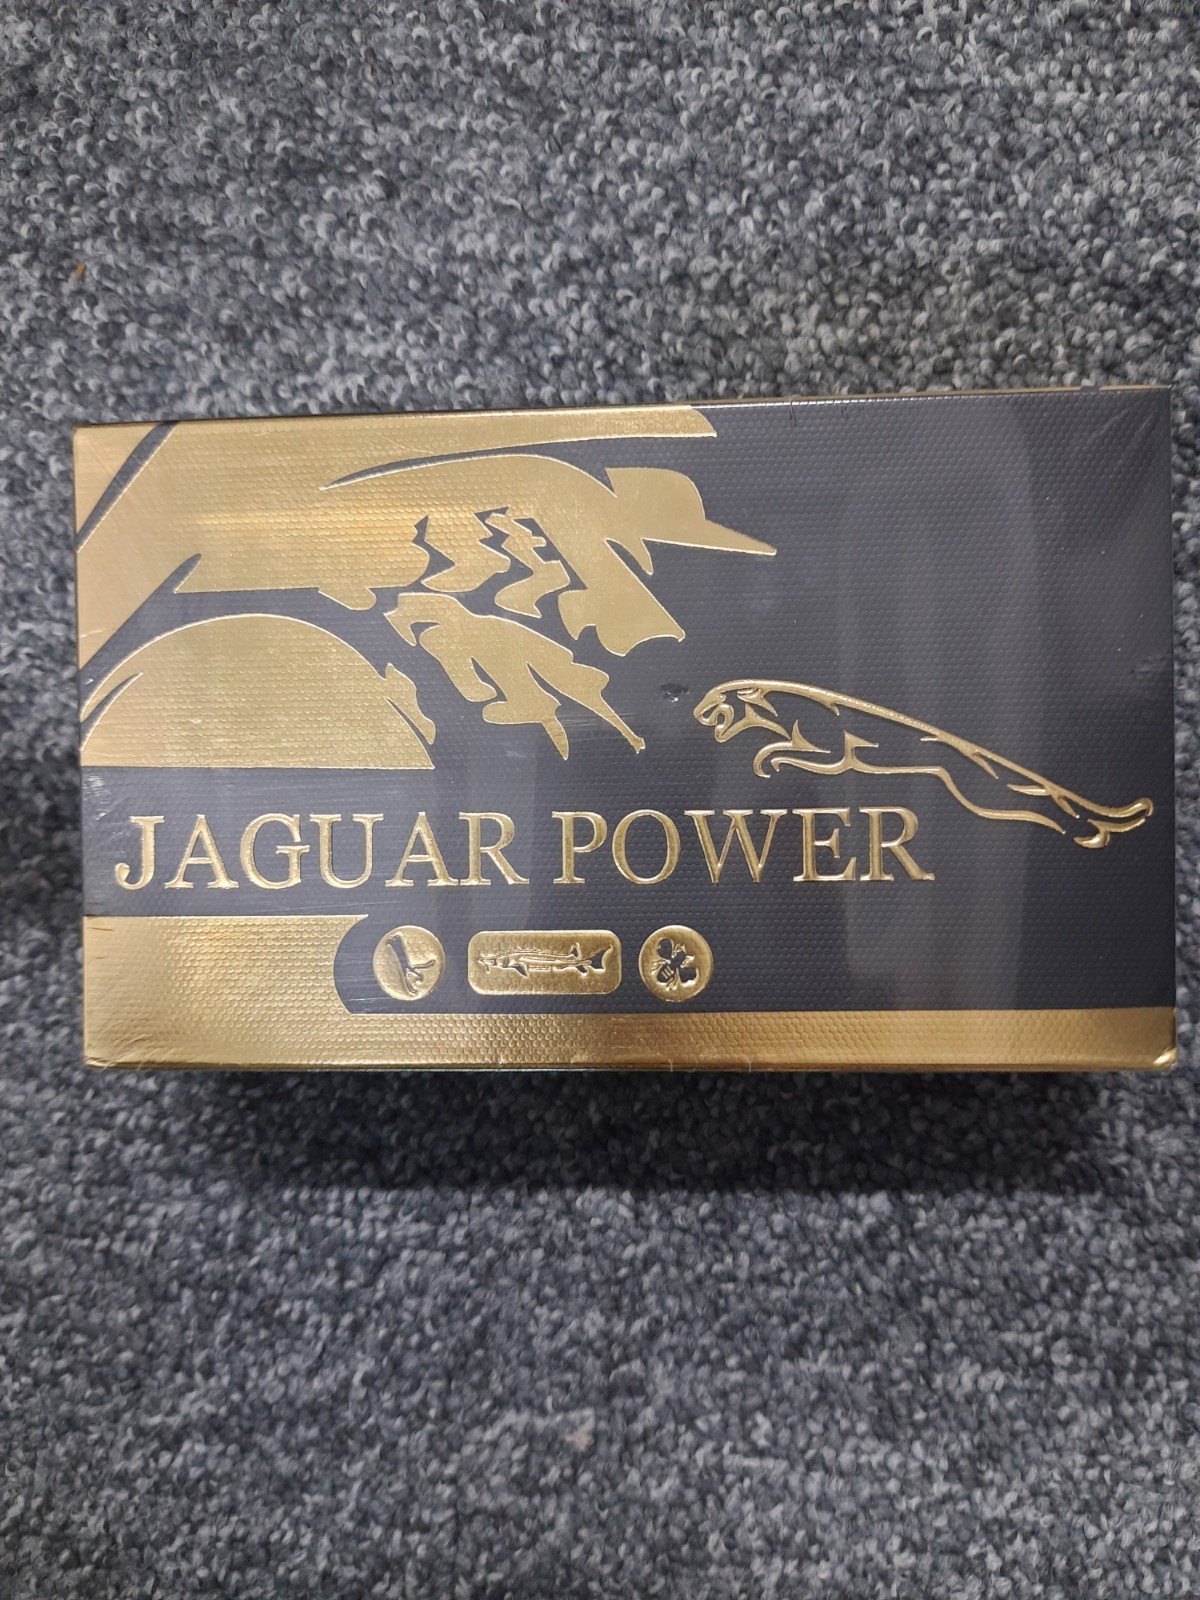 Image of the illigal product: Jaguar Power